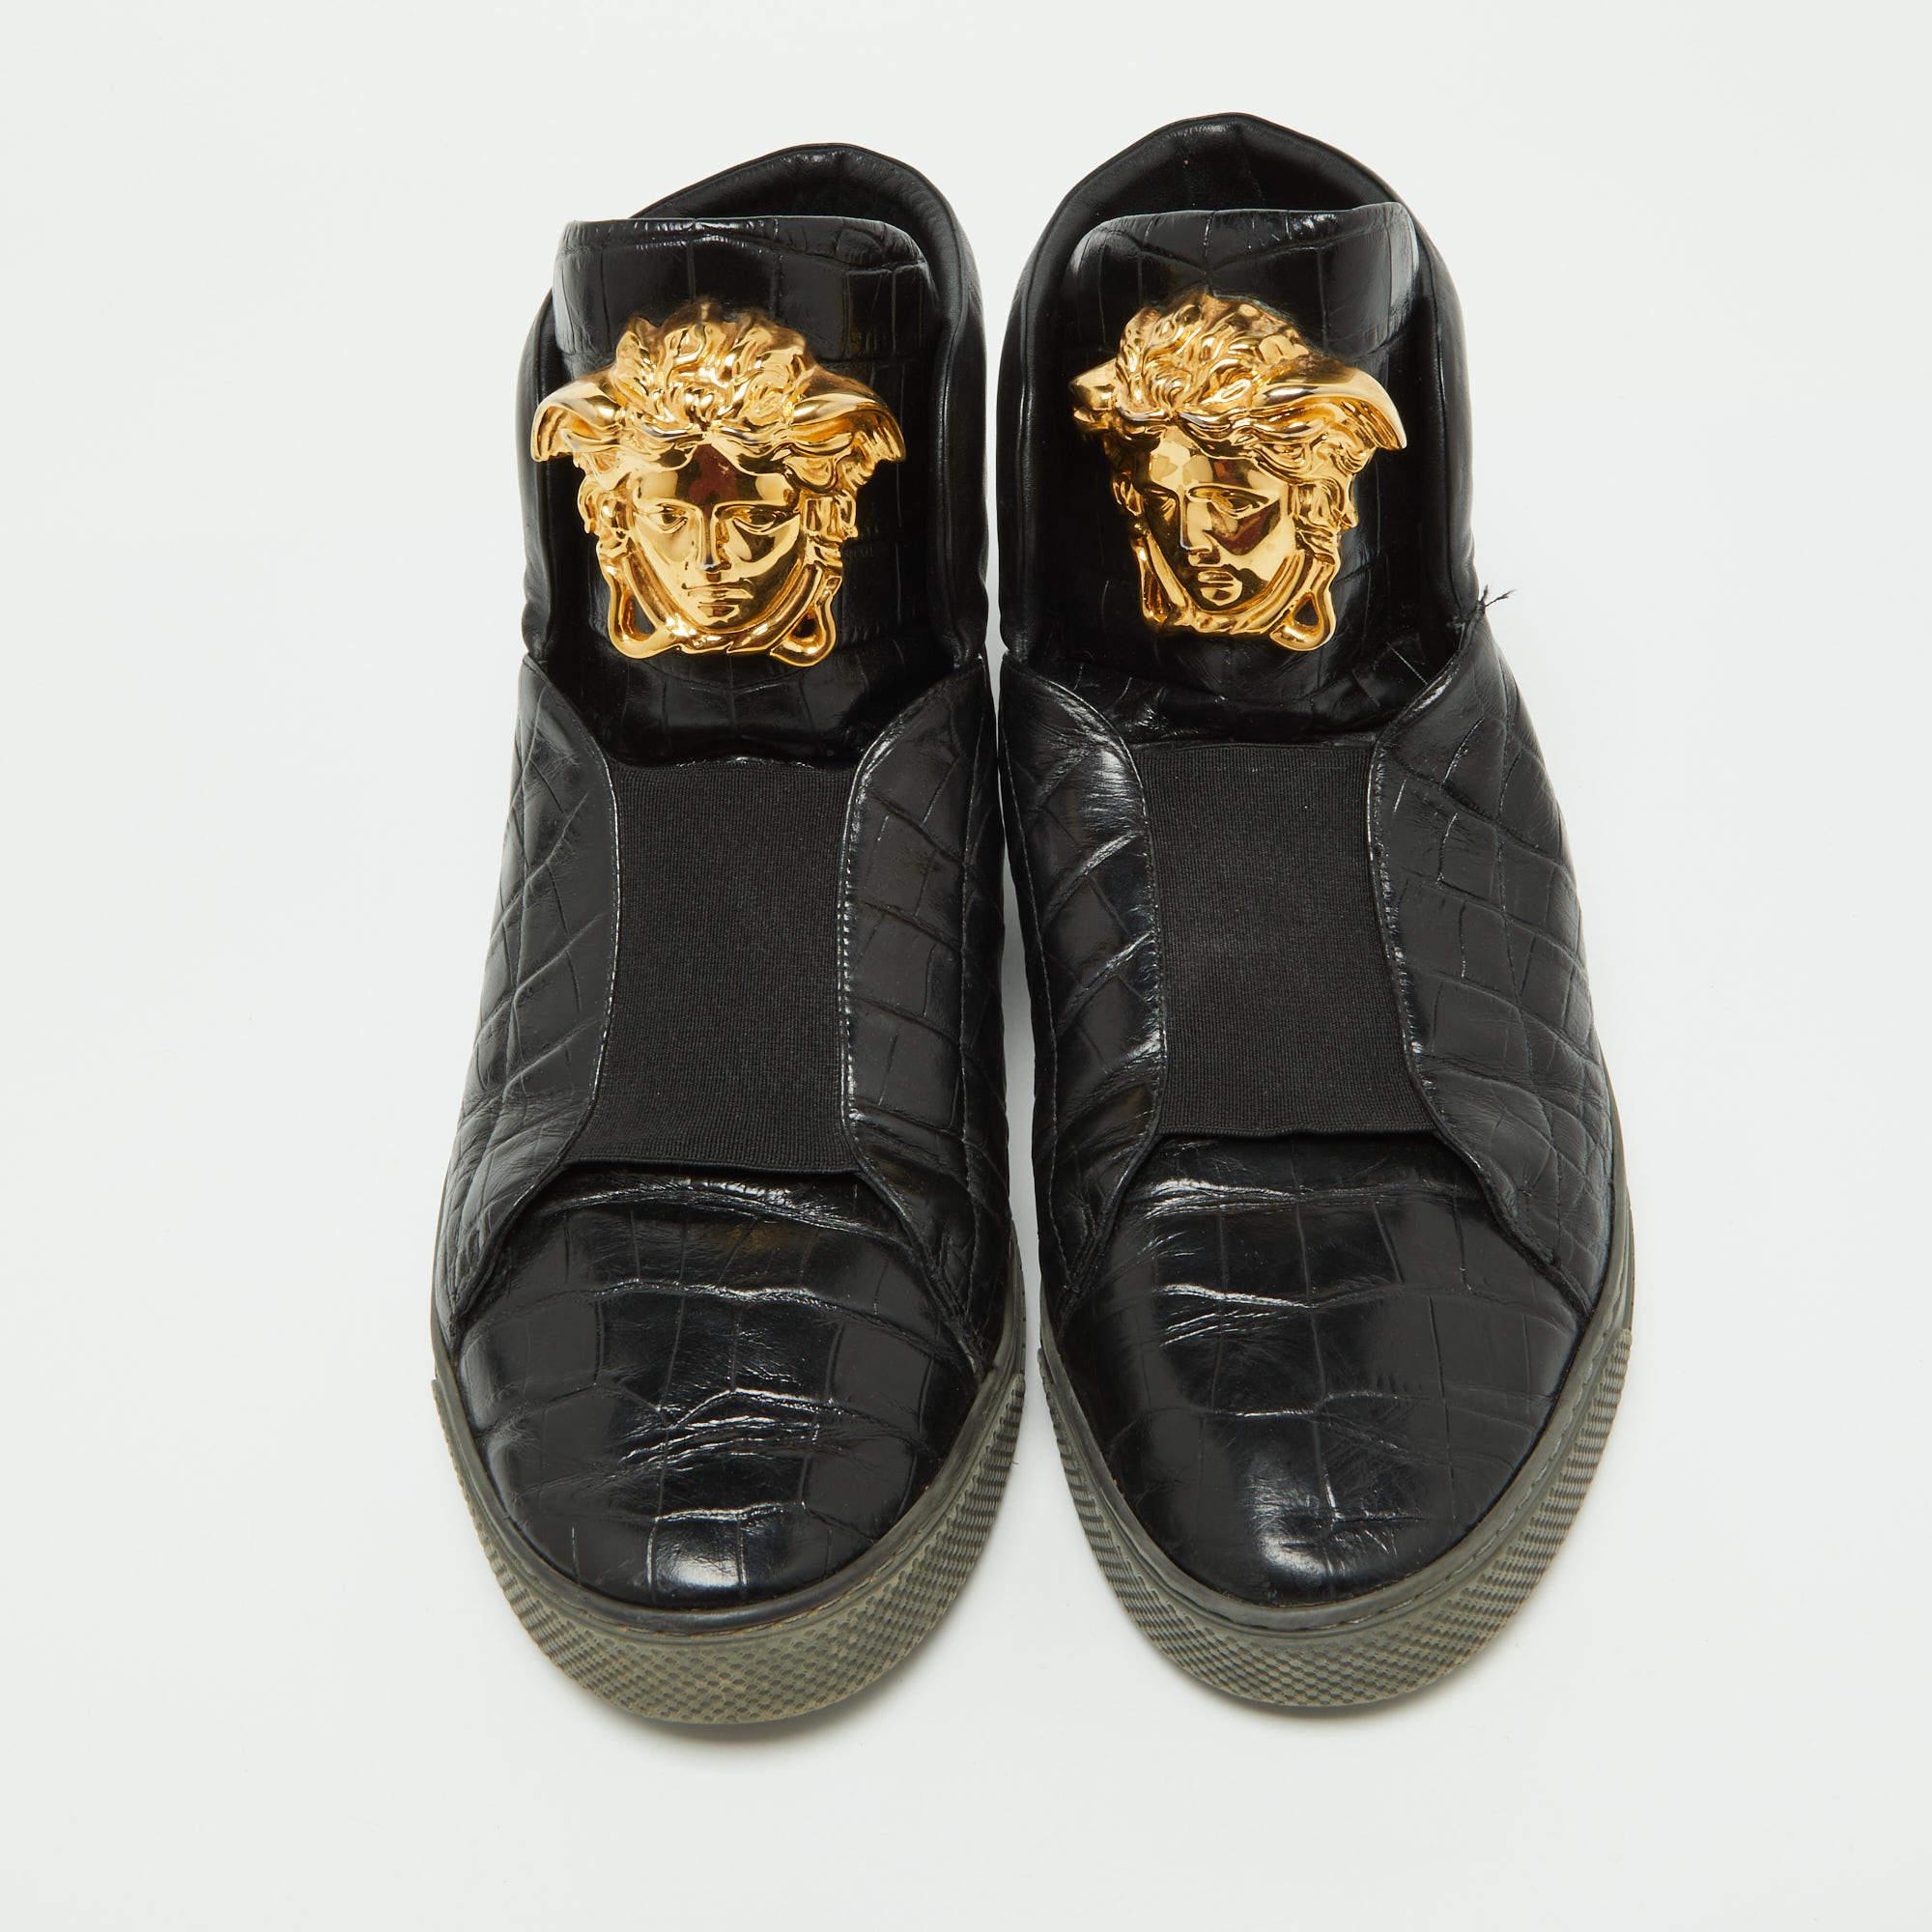 Versace Black Croc Embossed Leather Palazzo Medusa High Top Sneakers Size 44 For Sale 3